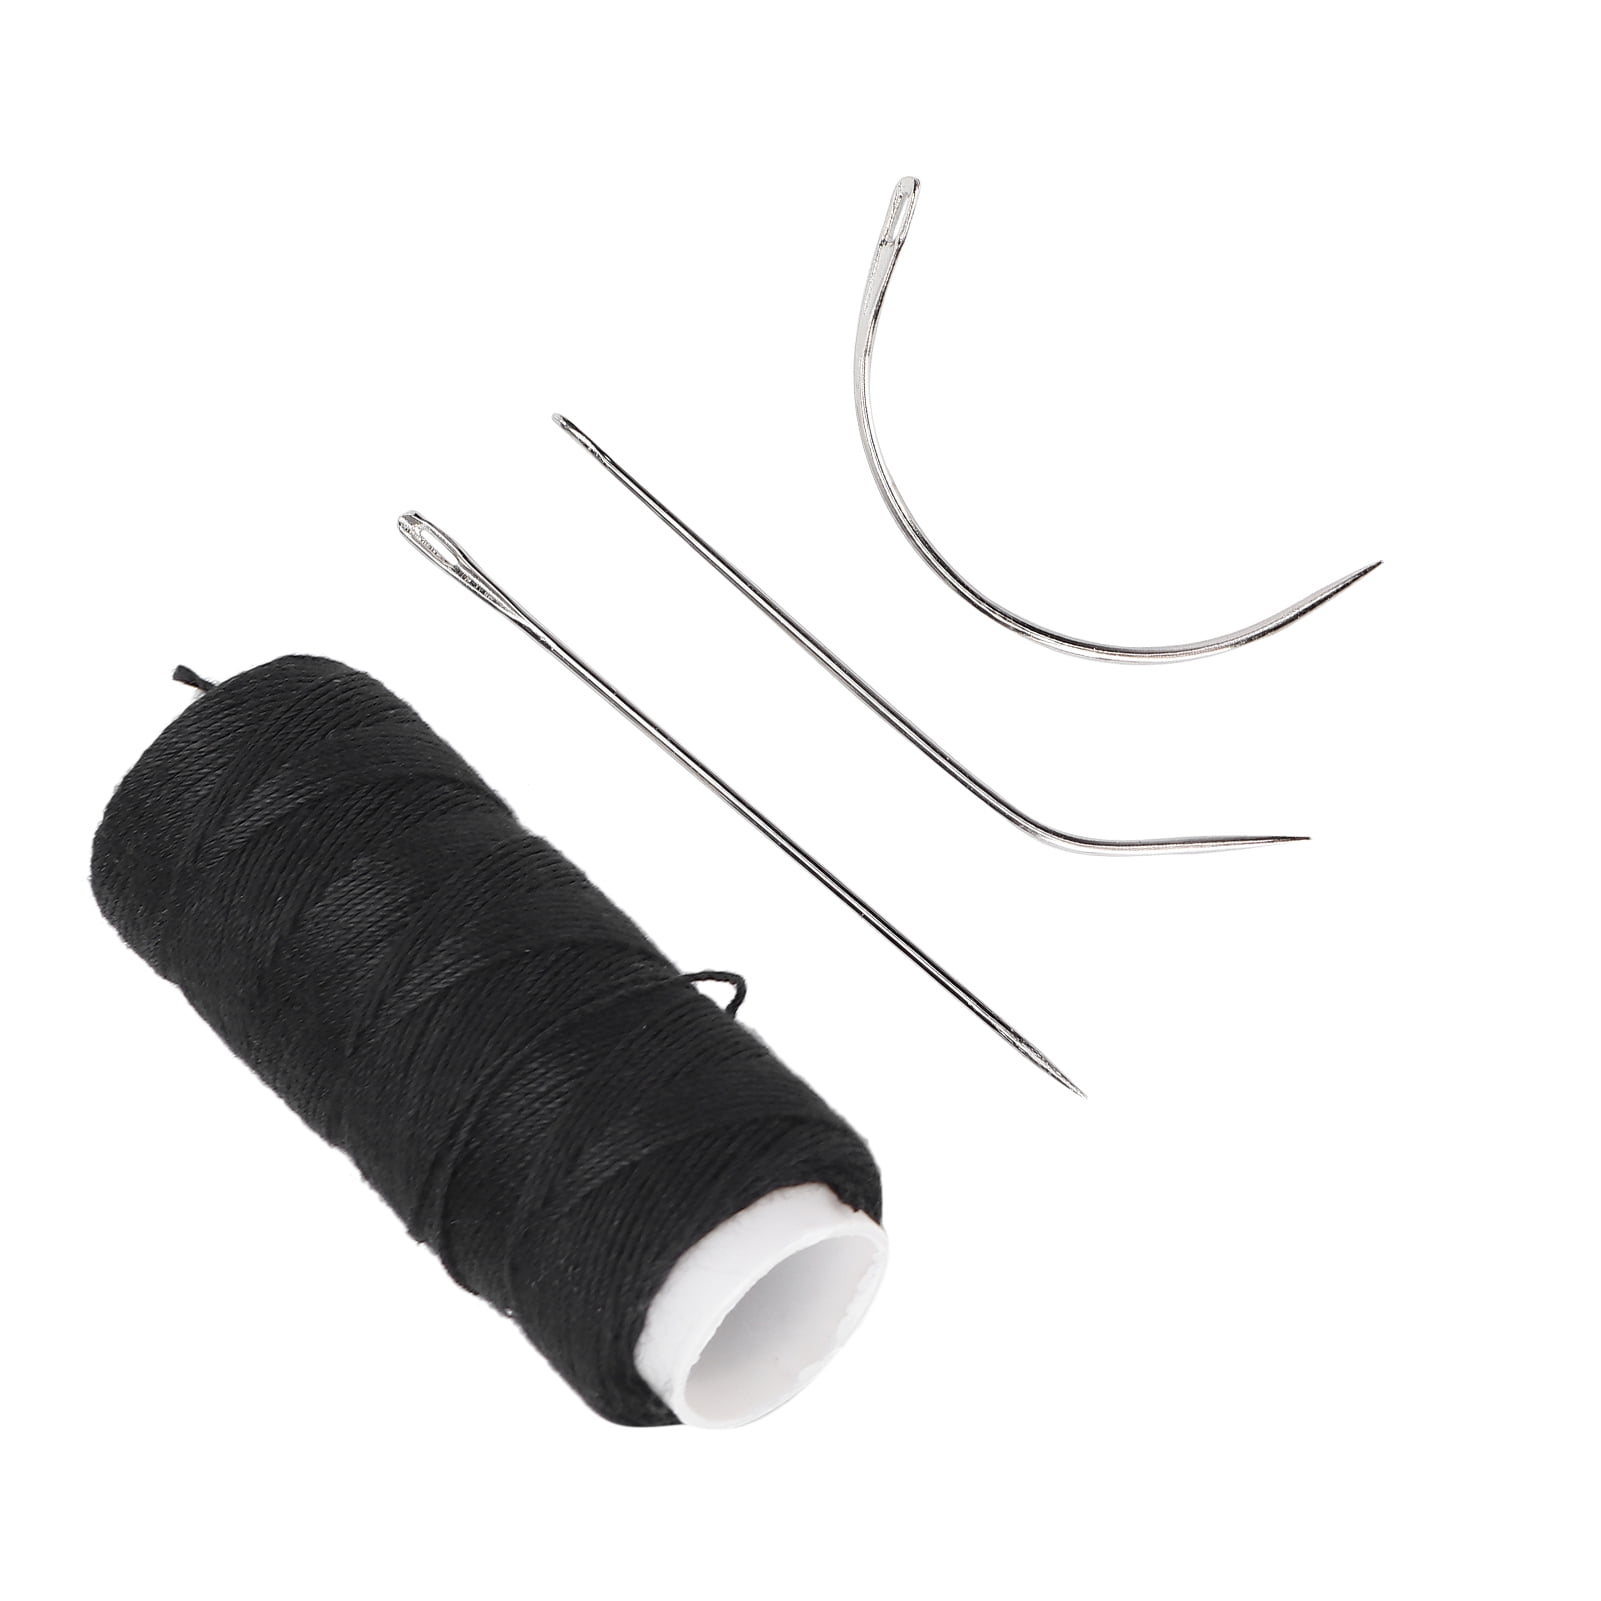 3 Rolls Hair Weaving Threads Making Wigs DIY Hair Extensions Sewing Threads with 7 Pieces C/J/I Shaped Needles Sewing Waxed Thread for Hand Sewing 